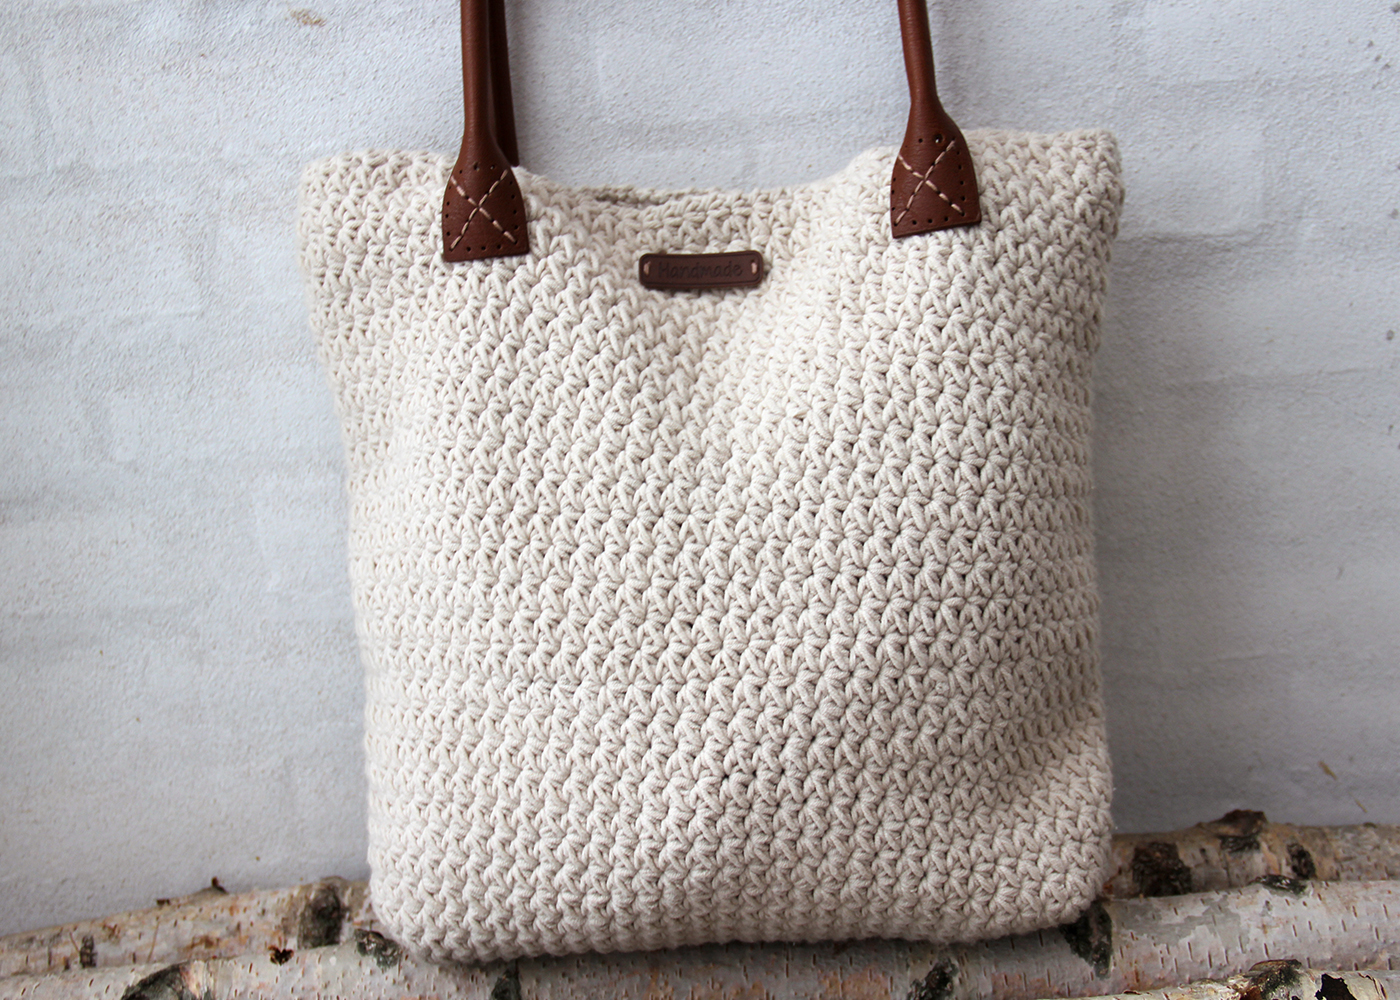 How to Sew a Big Beautiful Bag: 16 Free Patterns